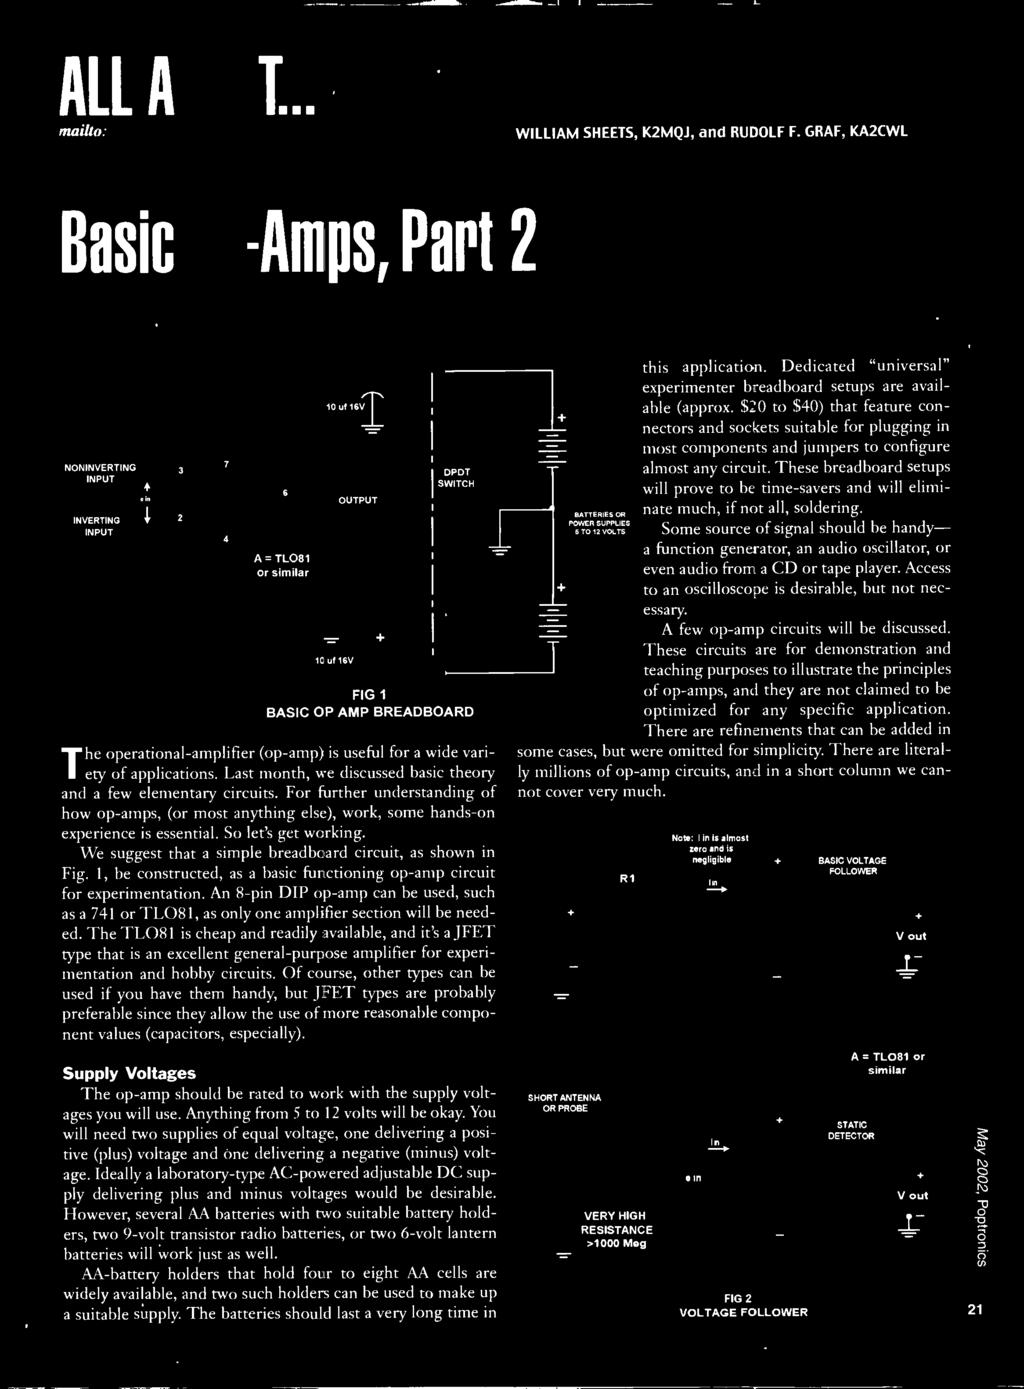 Last month, we discussed basic theory and a few elementary circuits. For further understanding of how op -amps, (or most anything else), work, some hands -on experience is essential.